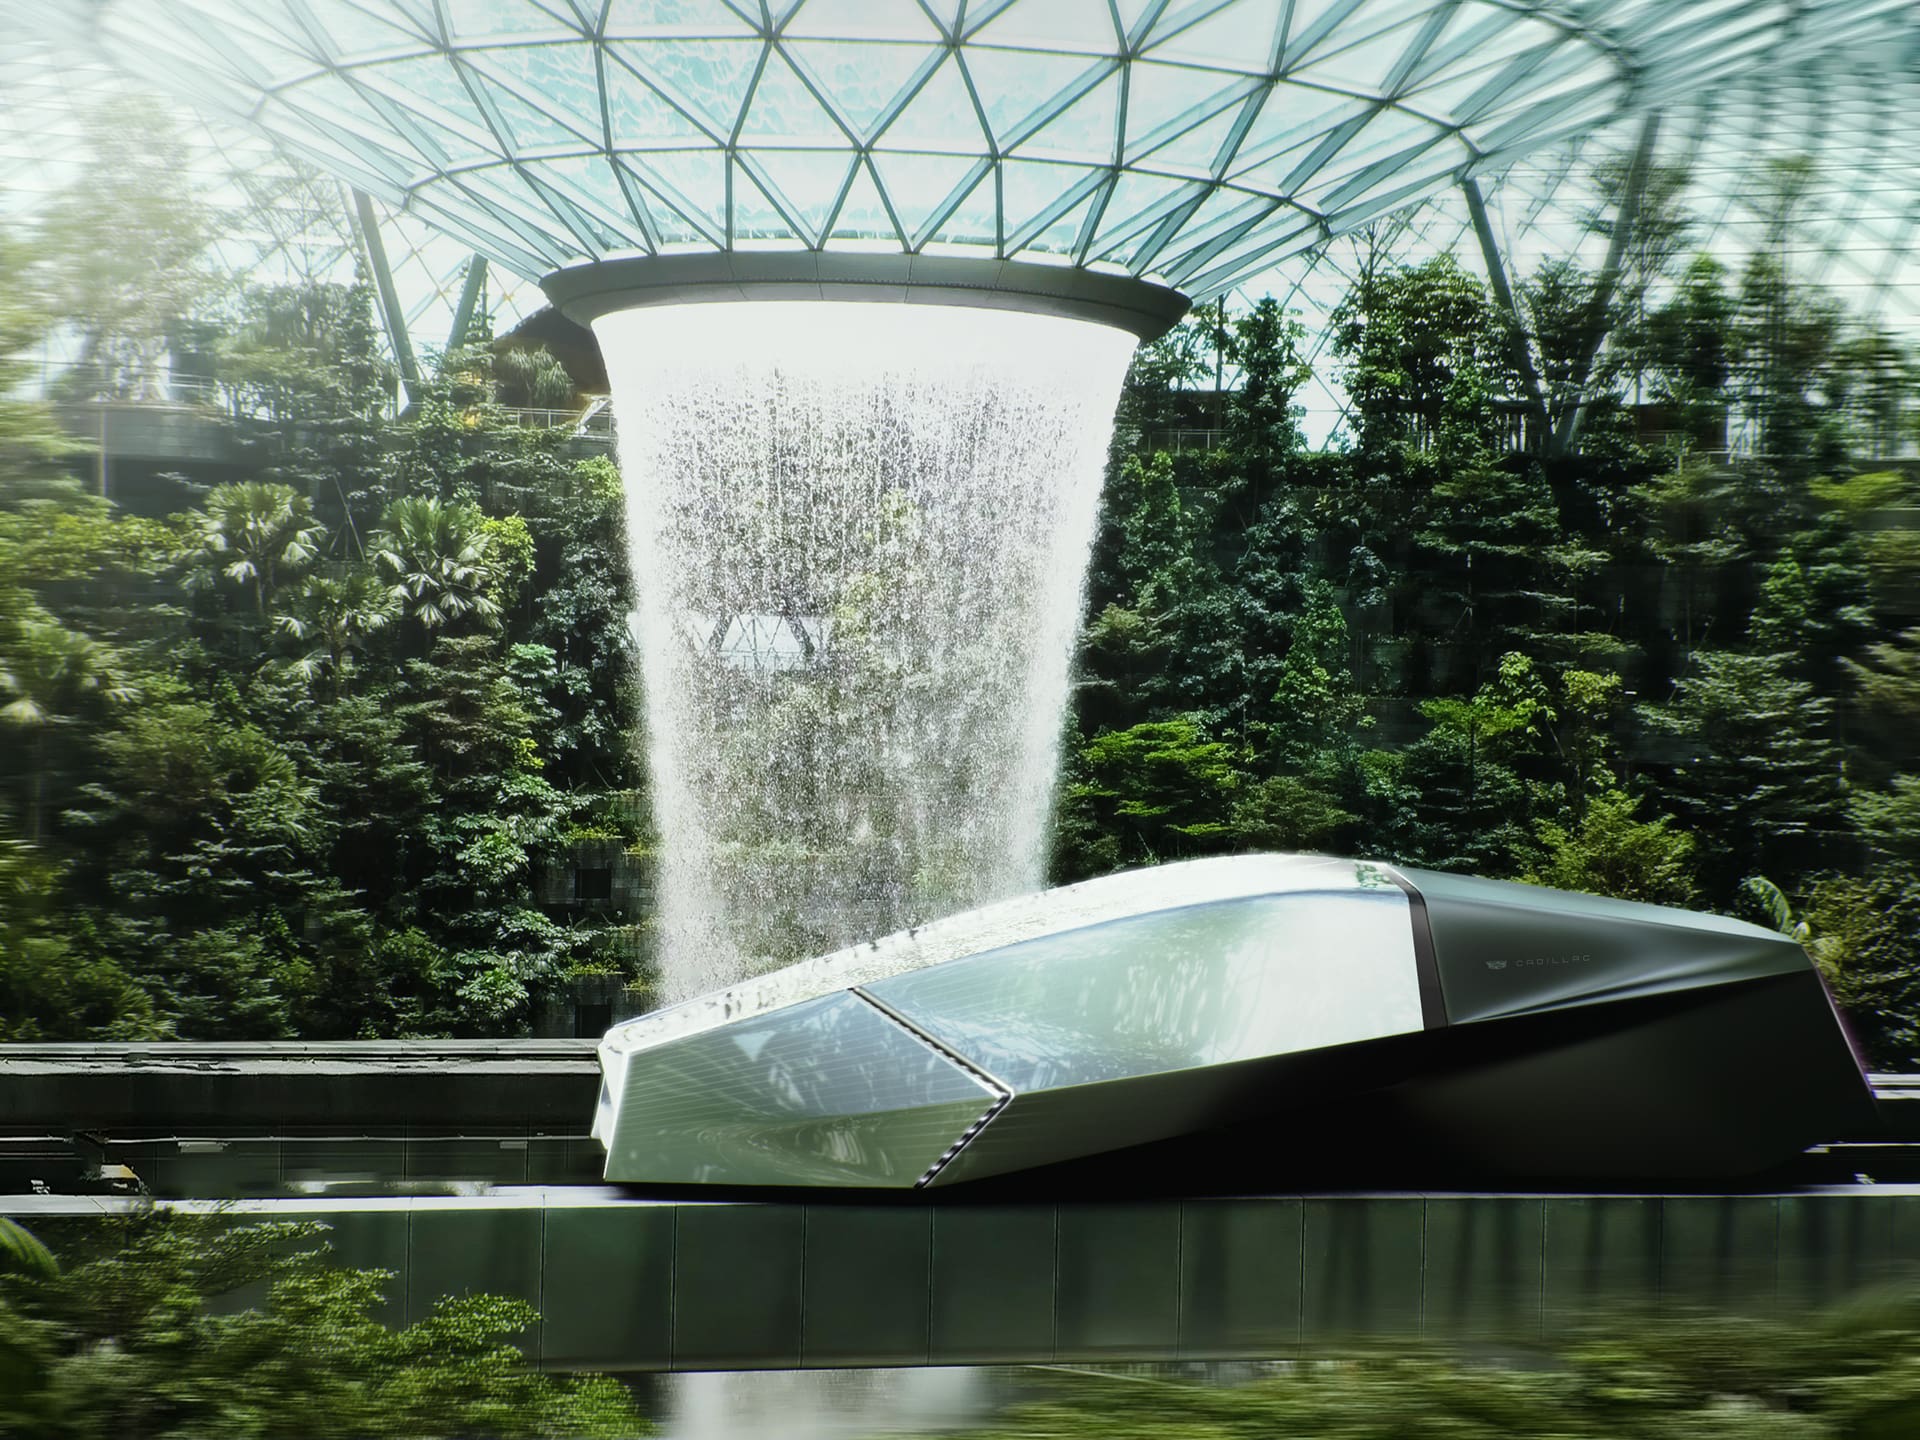 Concept art of a sleek silver and black vehicle driving on a track underneath a fountain waterfall. Located inside of a green house full of forestry